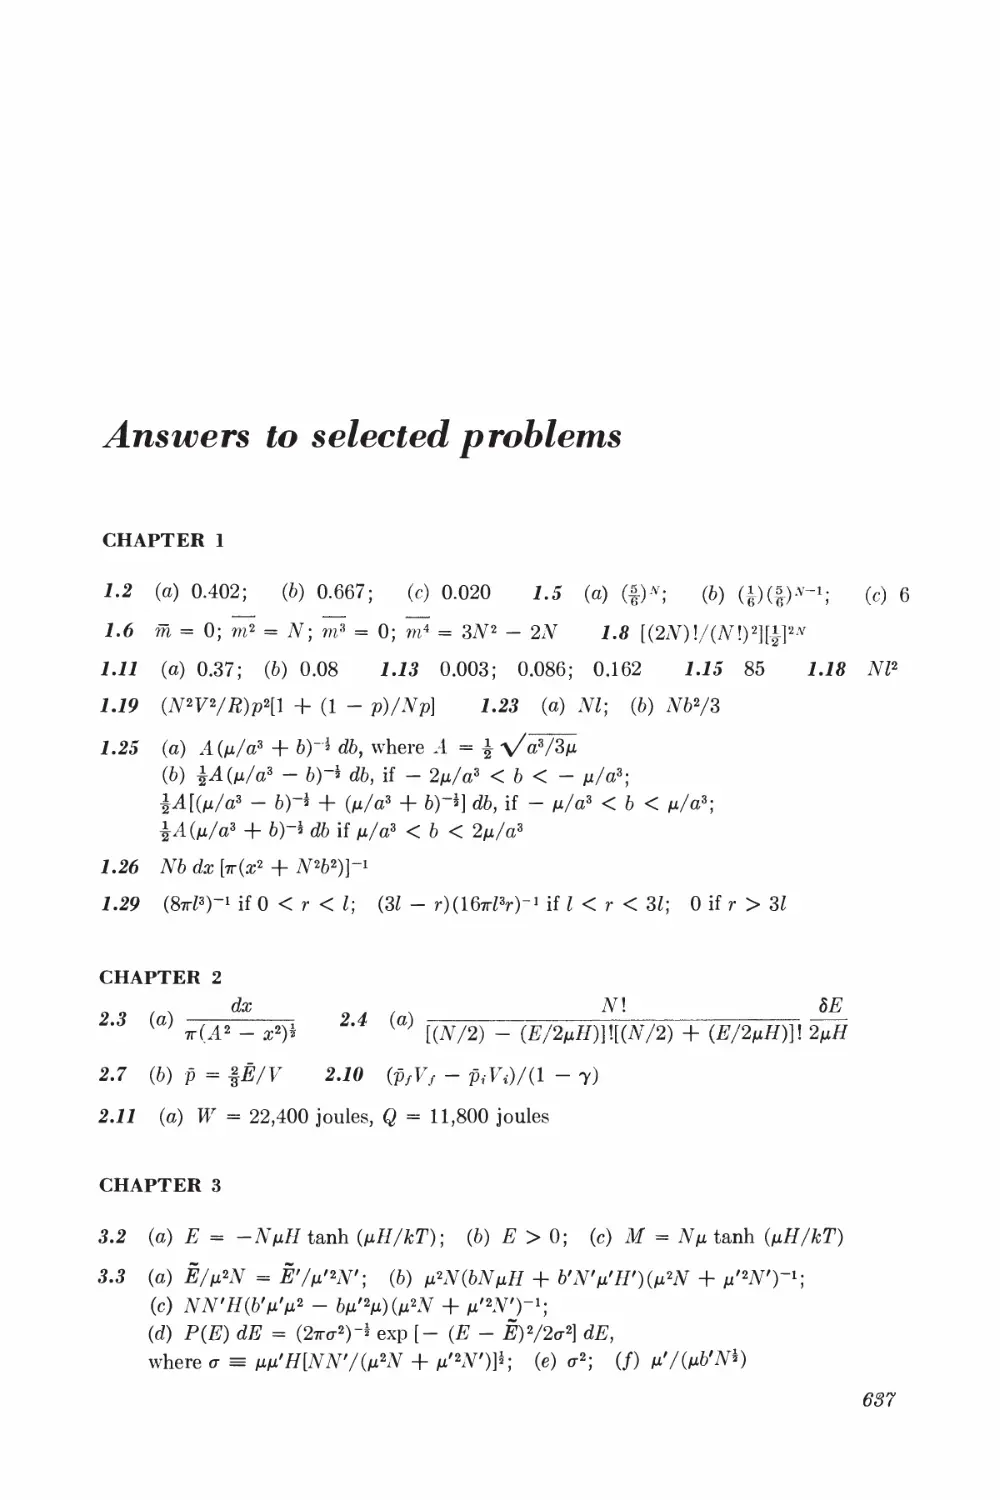 Answers to Selected Problems